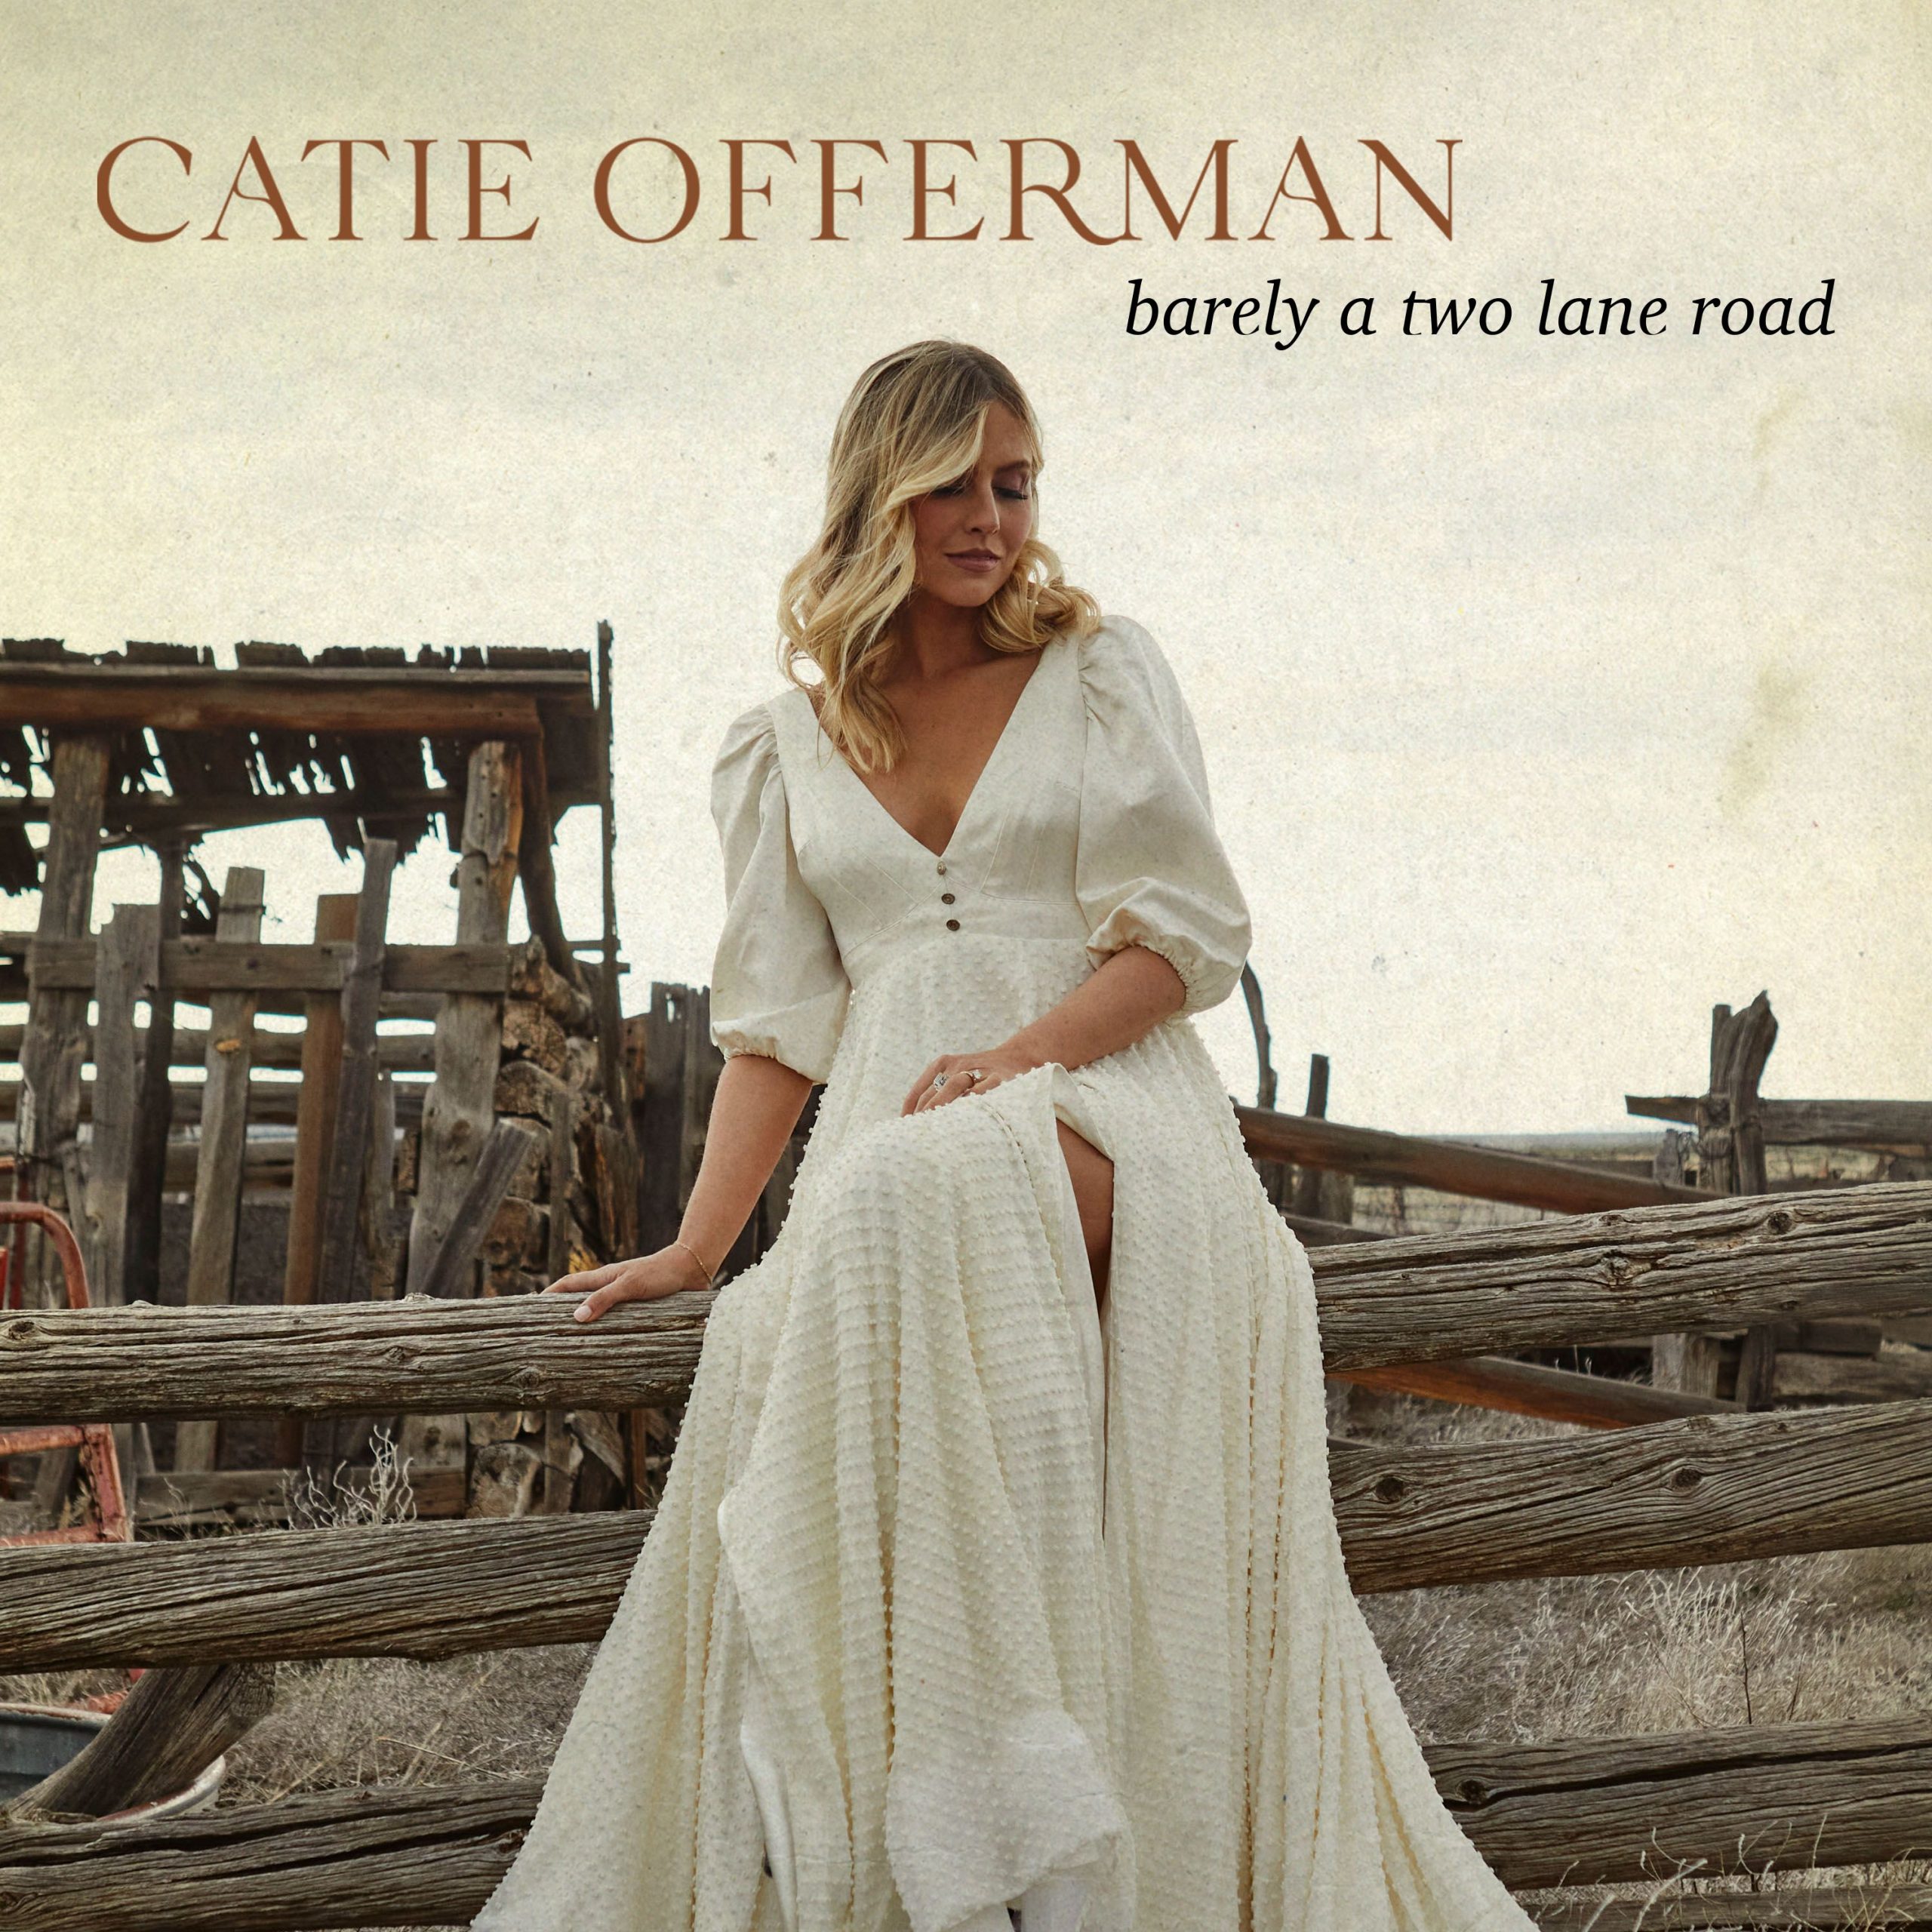 CATIE OFFERMAN REMINISCES ABOUT YOUNG LOVE IN NEW TRACK OUT TODAY “BARELY A TWO LANE ROAD”